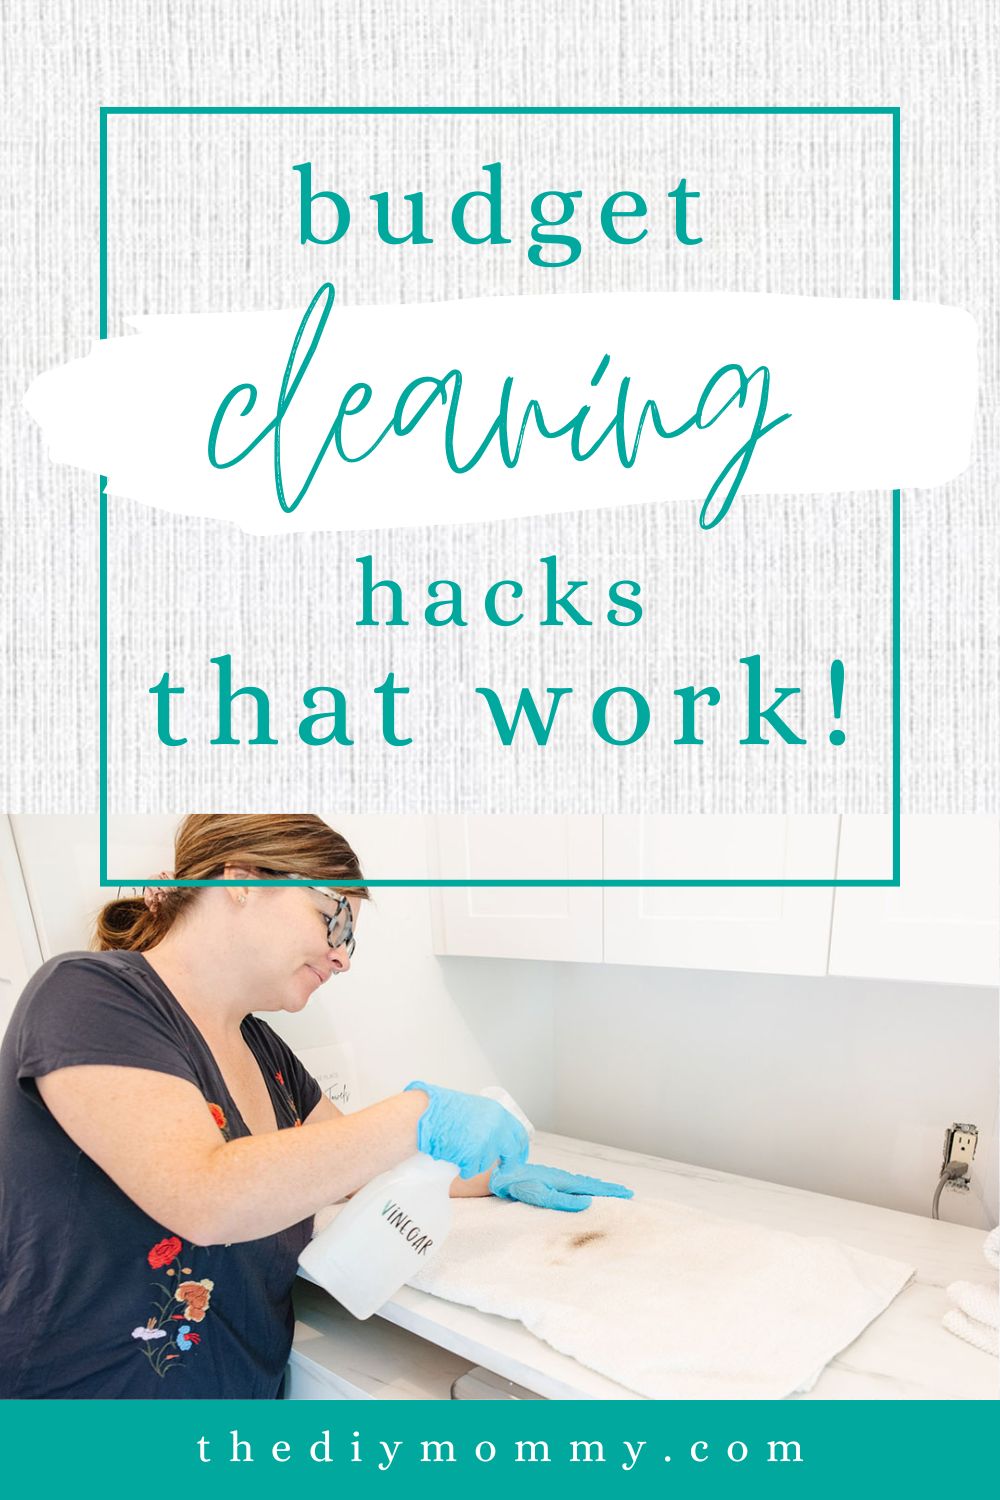 10 Easy, Budget Friendly Cleaning Hacks